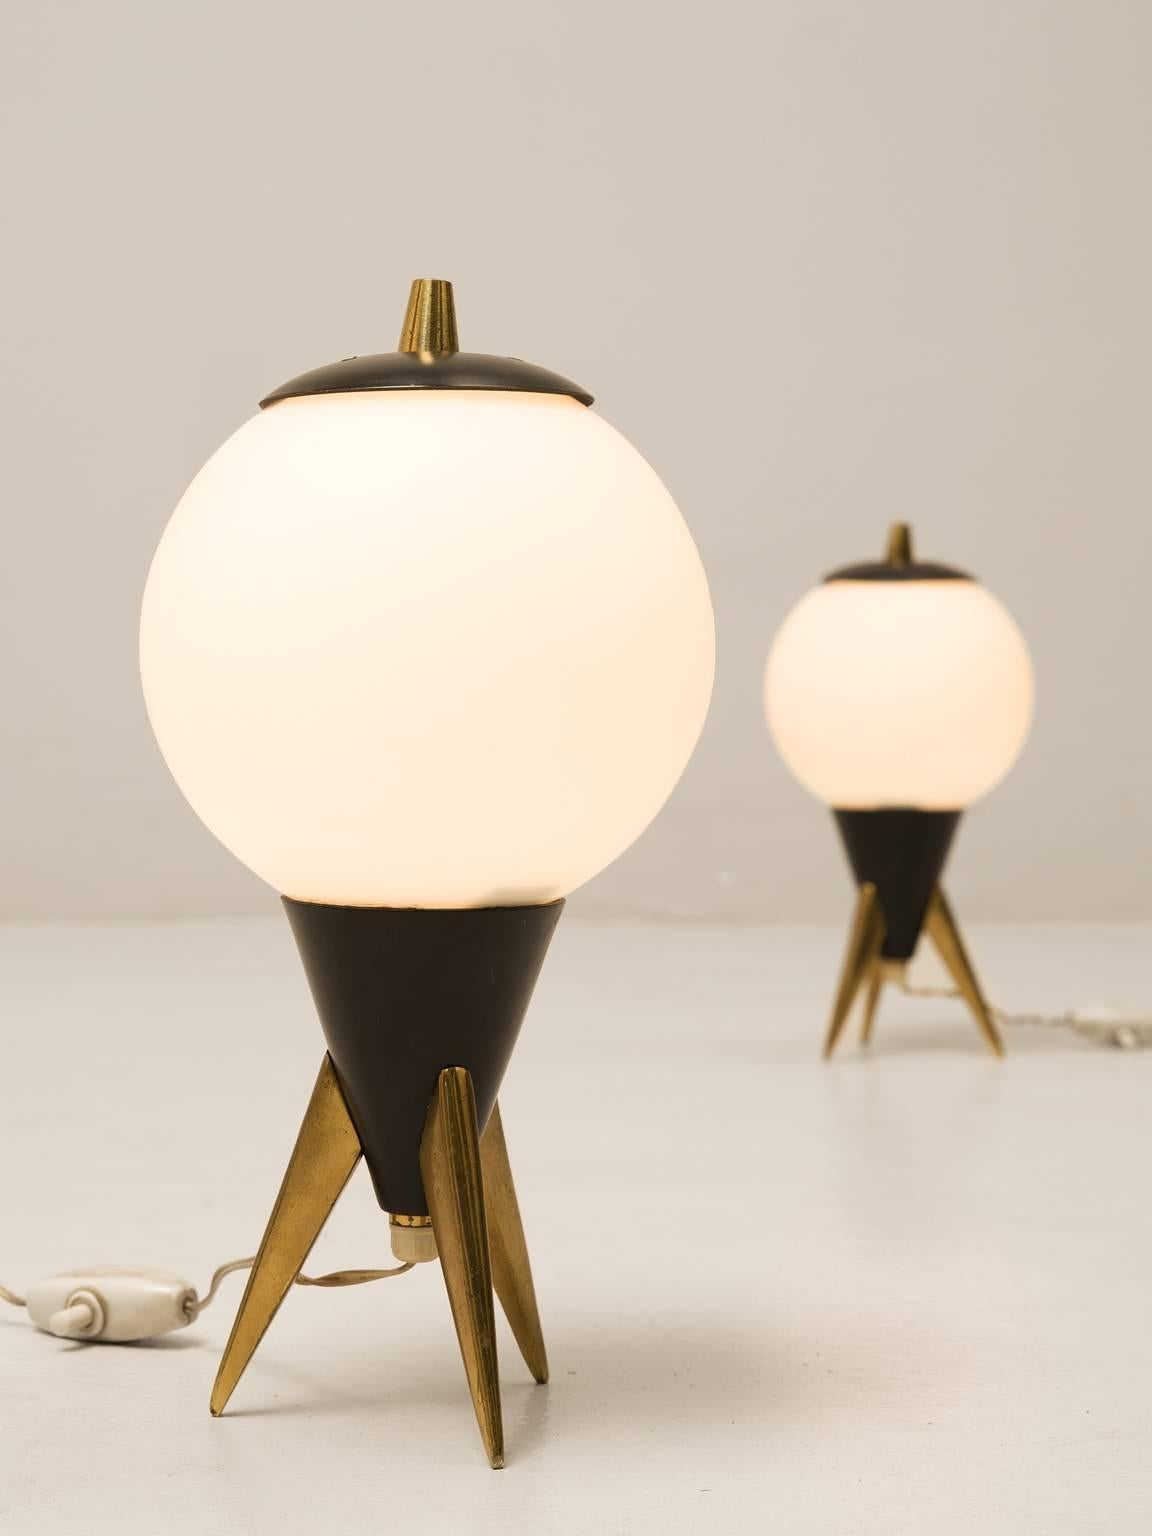 Set of two table lamp in metal, Europe, 1970s.

Two frivolous and small table lights. These lights remind of little rockets. A brass tripod base with a black coated cone, topped with a large opaline glass sphere. Each sphere has a little cap,